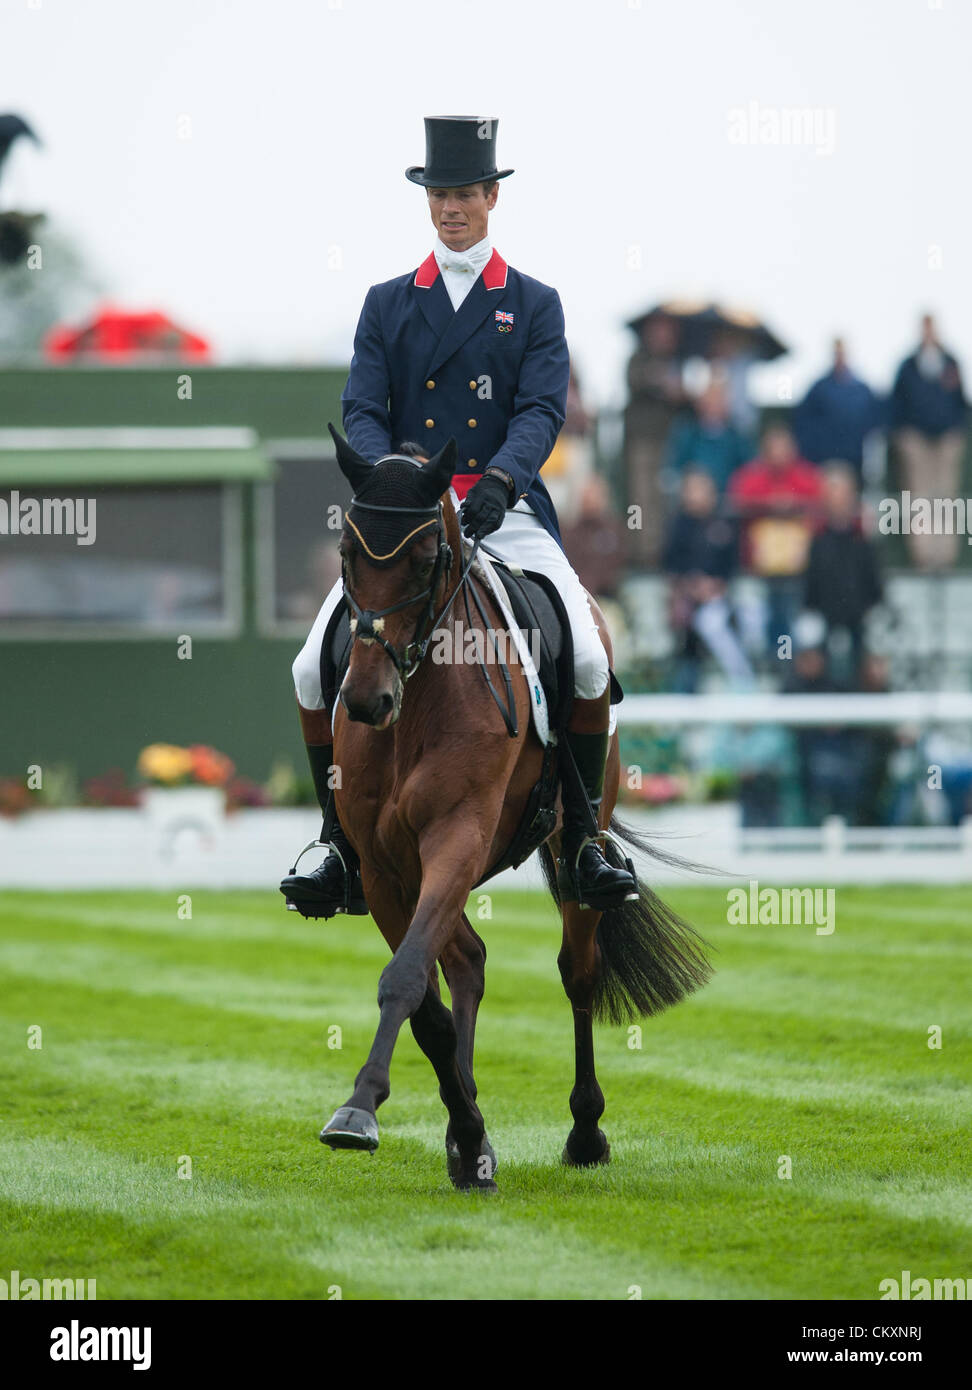 Burghley House, Stamford, UK. 30th Aug 2012. Olympic Silver medallist William Fox-Pitt and Seacookie - Burghley House, Stamford, UK - The Dressage phase,  Land Rover Burghley Horse Trials,30th August 2012 Credit:  Nico Morgan / Alamy Live News Stock Photo